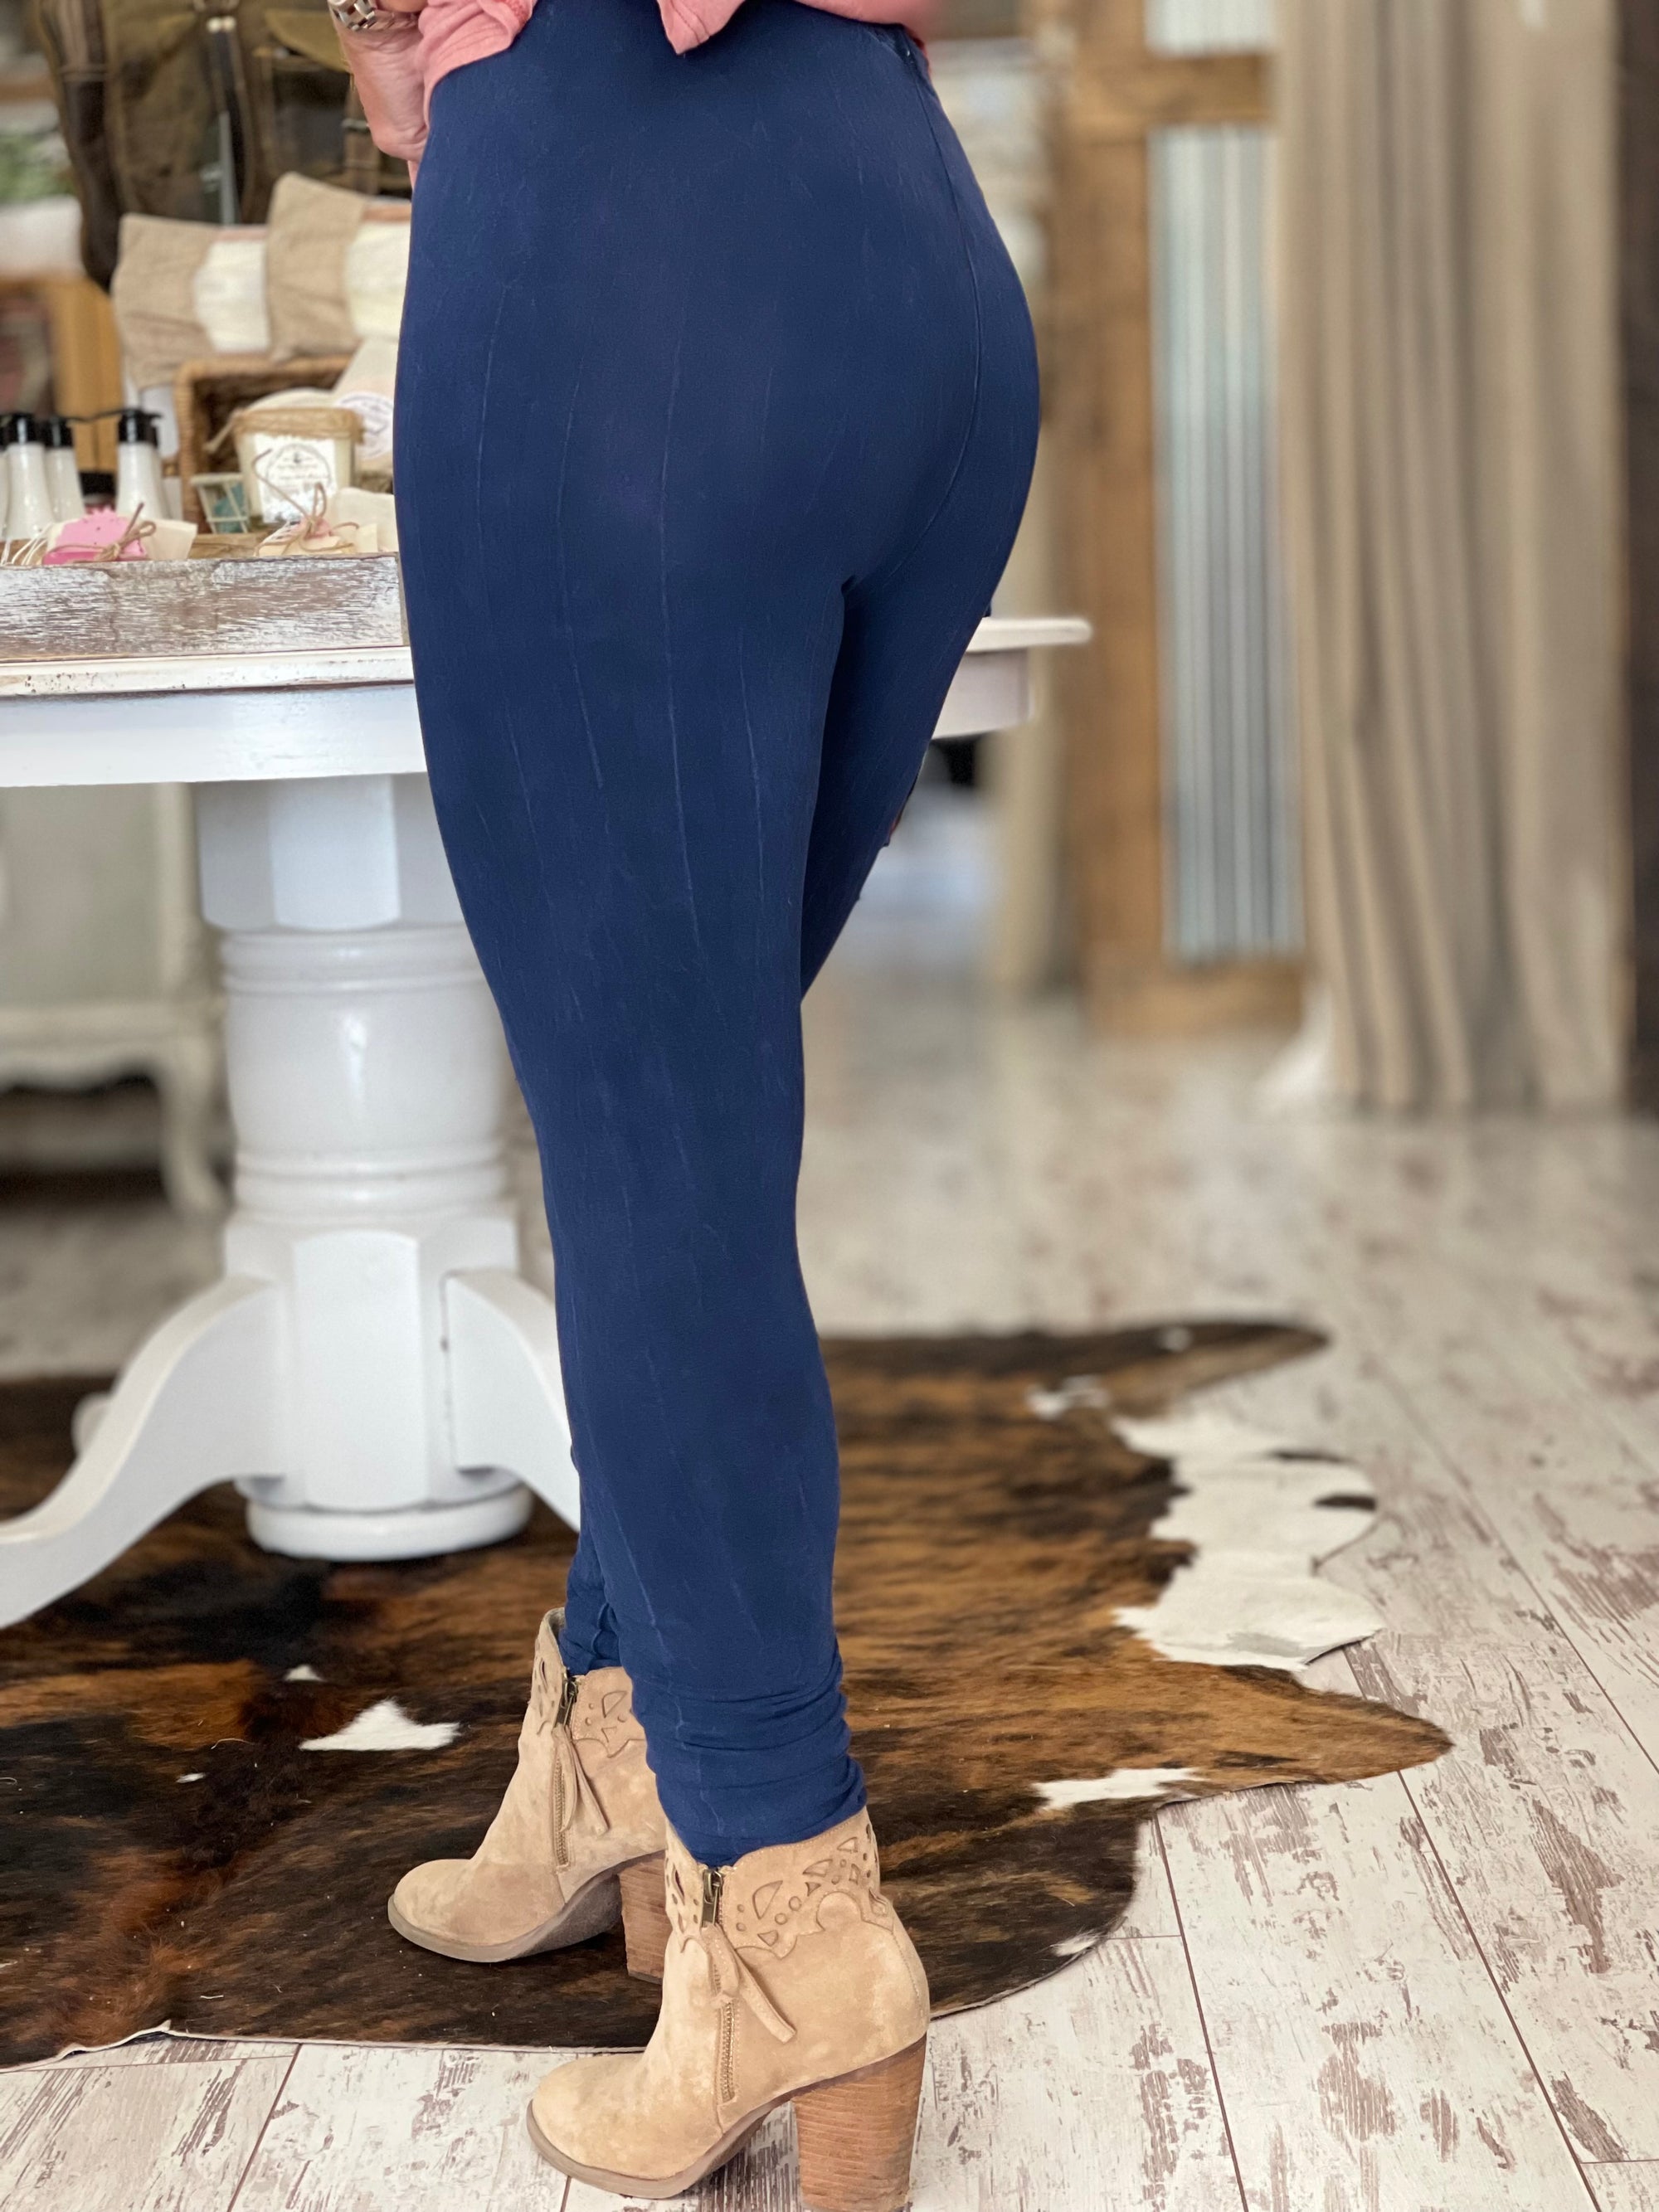 Navy Fleece Lined Leggings  Outfits with leggings, Blue leggings outfit,  Light blue leggings outfit